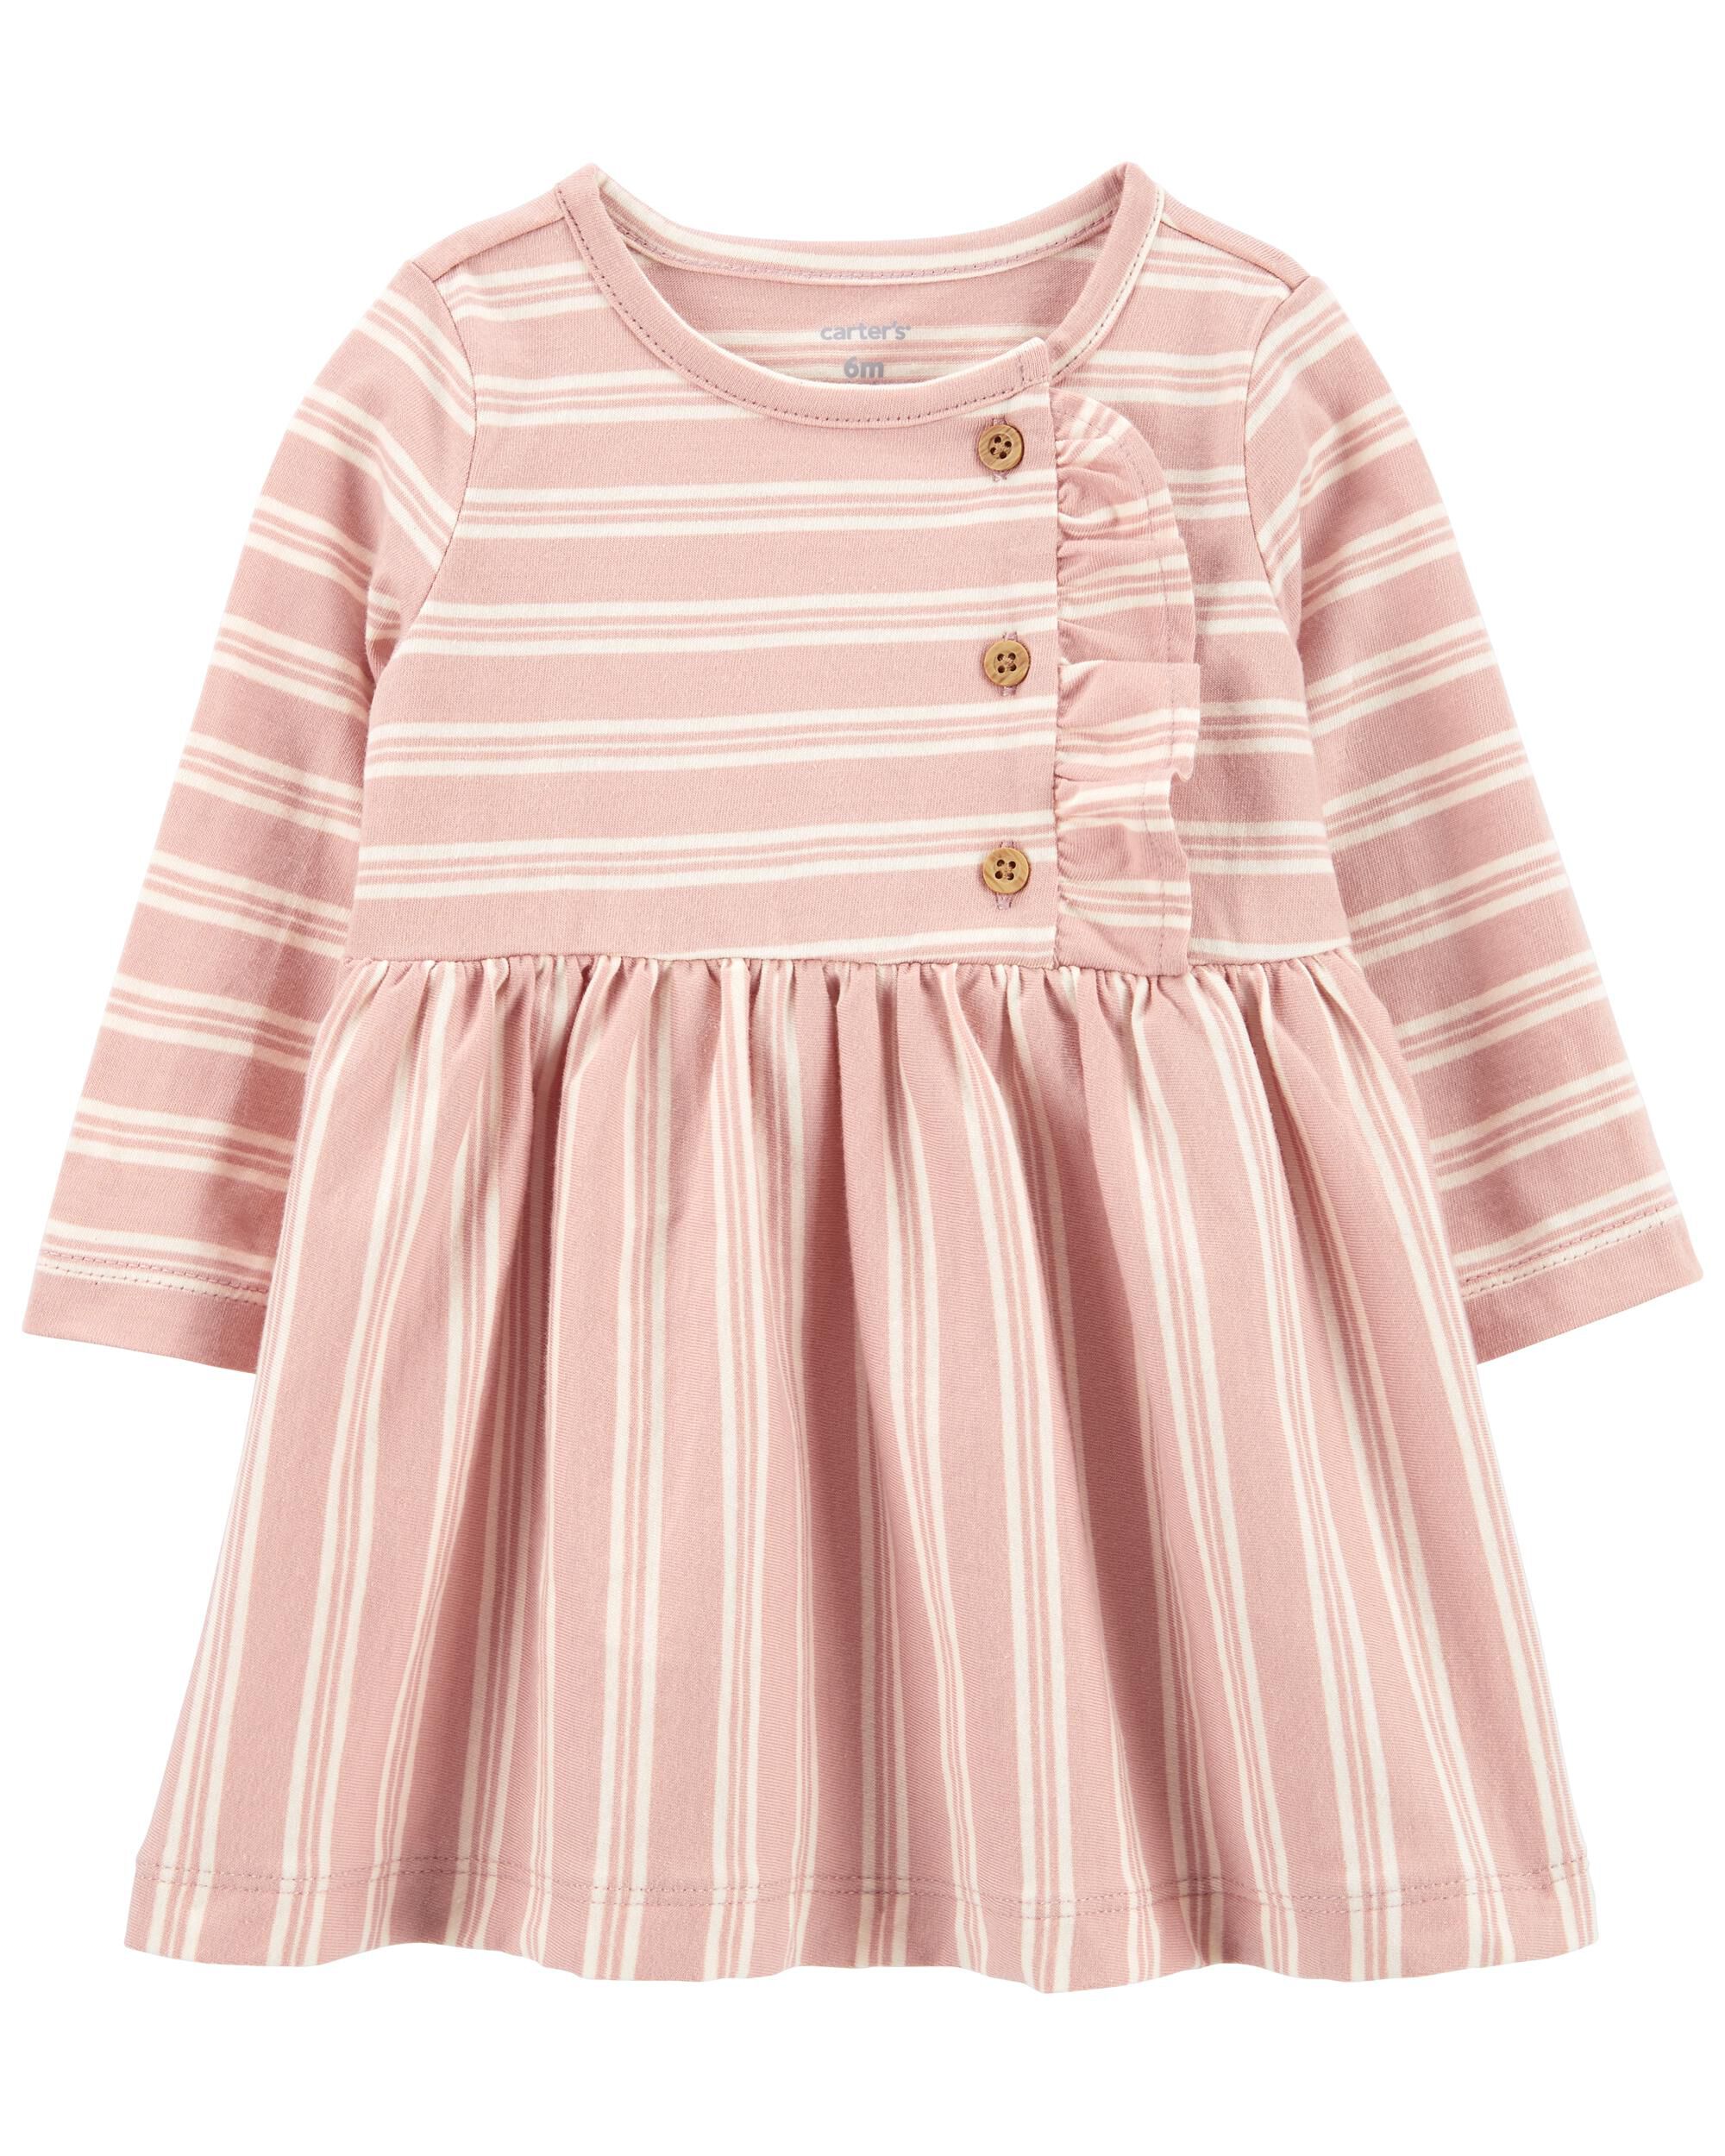 Carters Baby Striped Jersey Dress